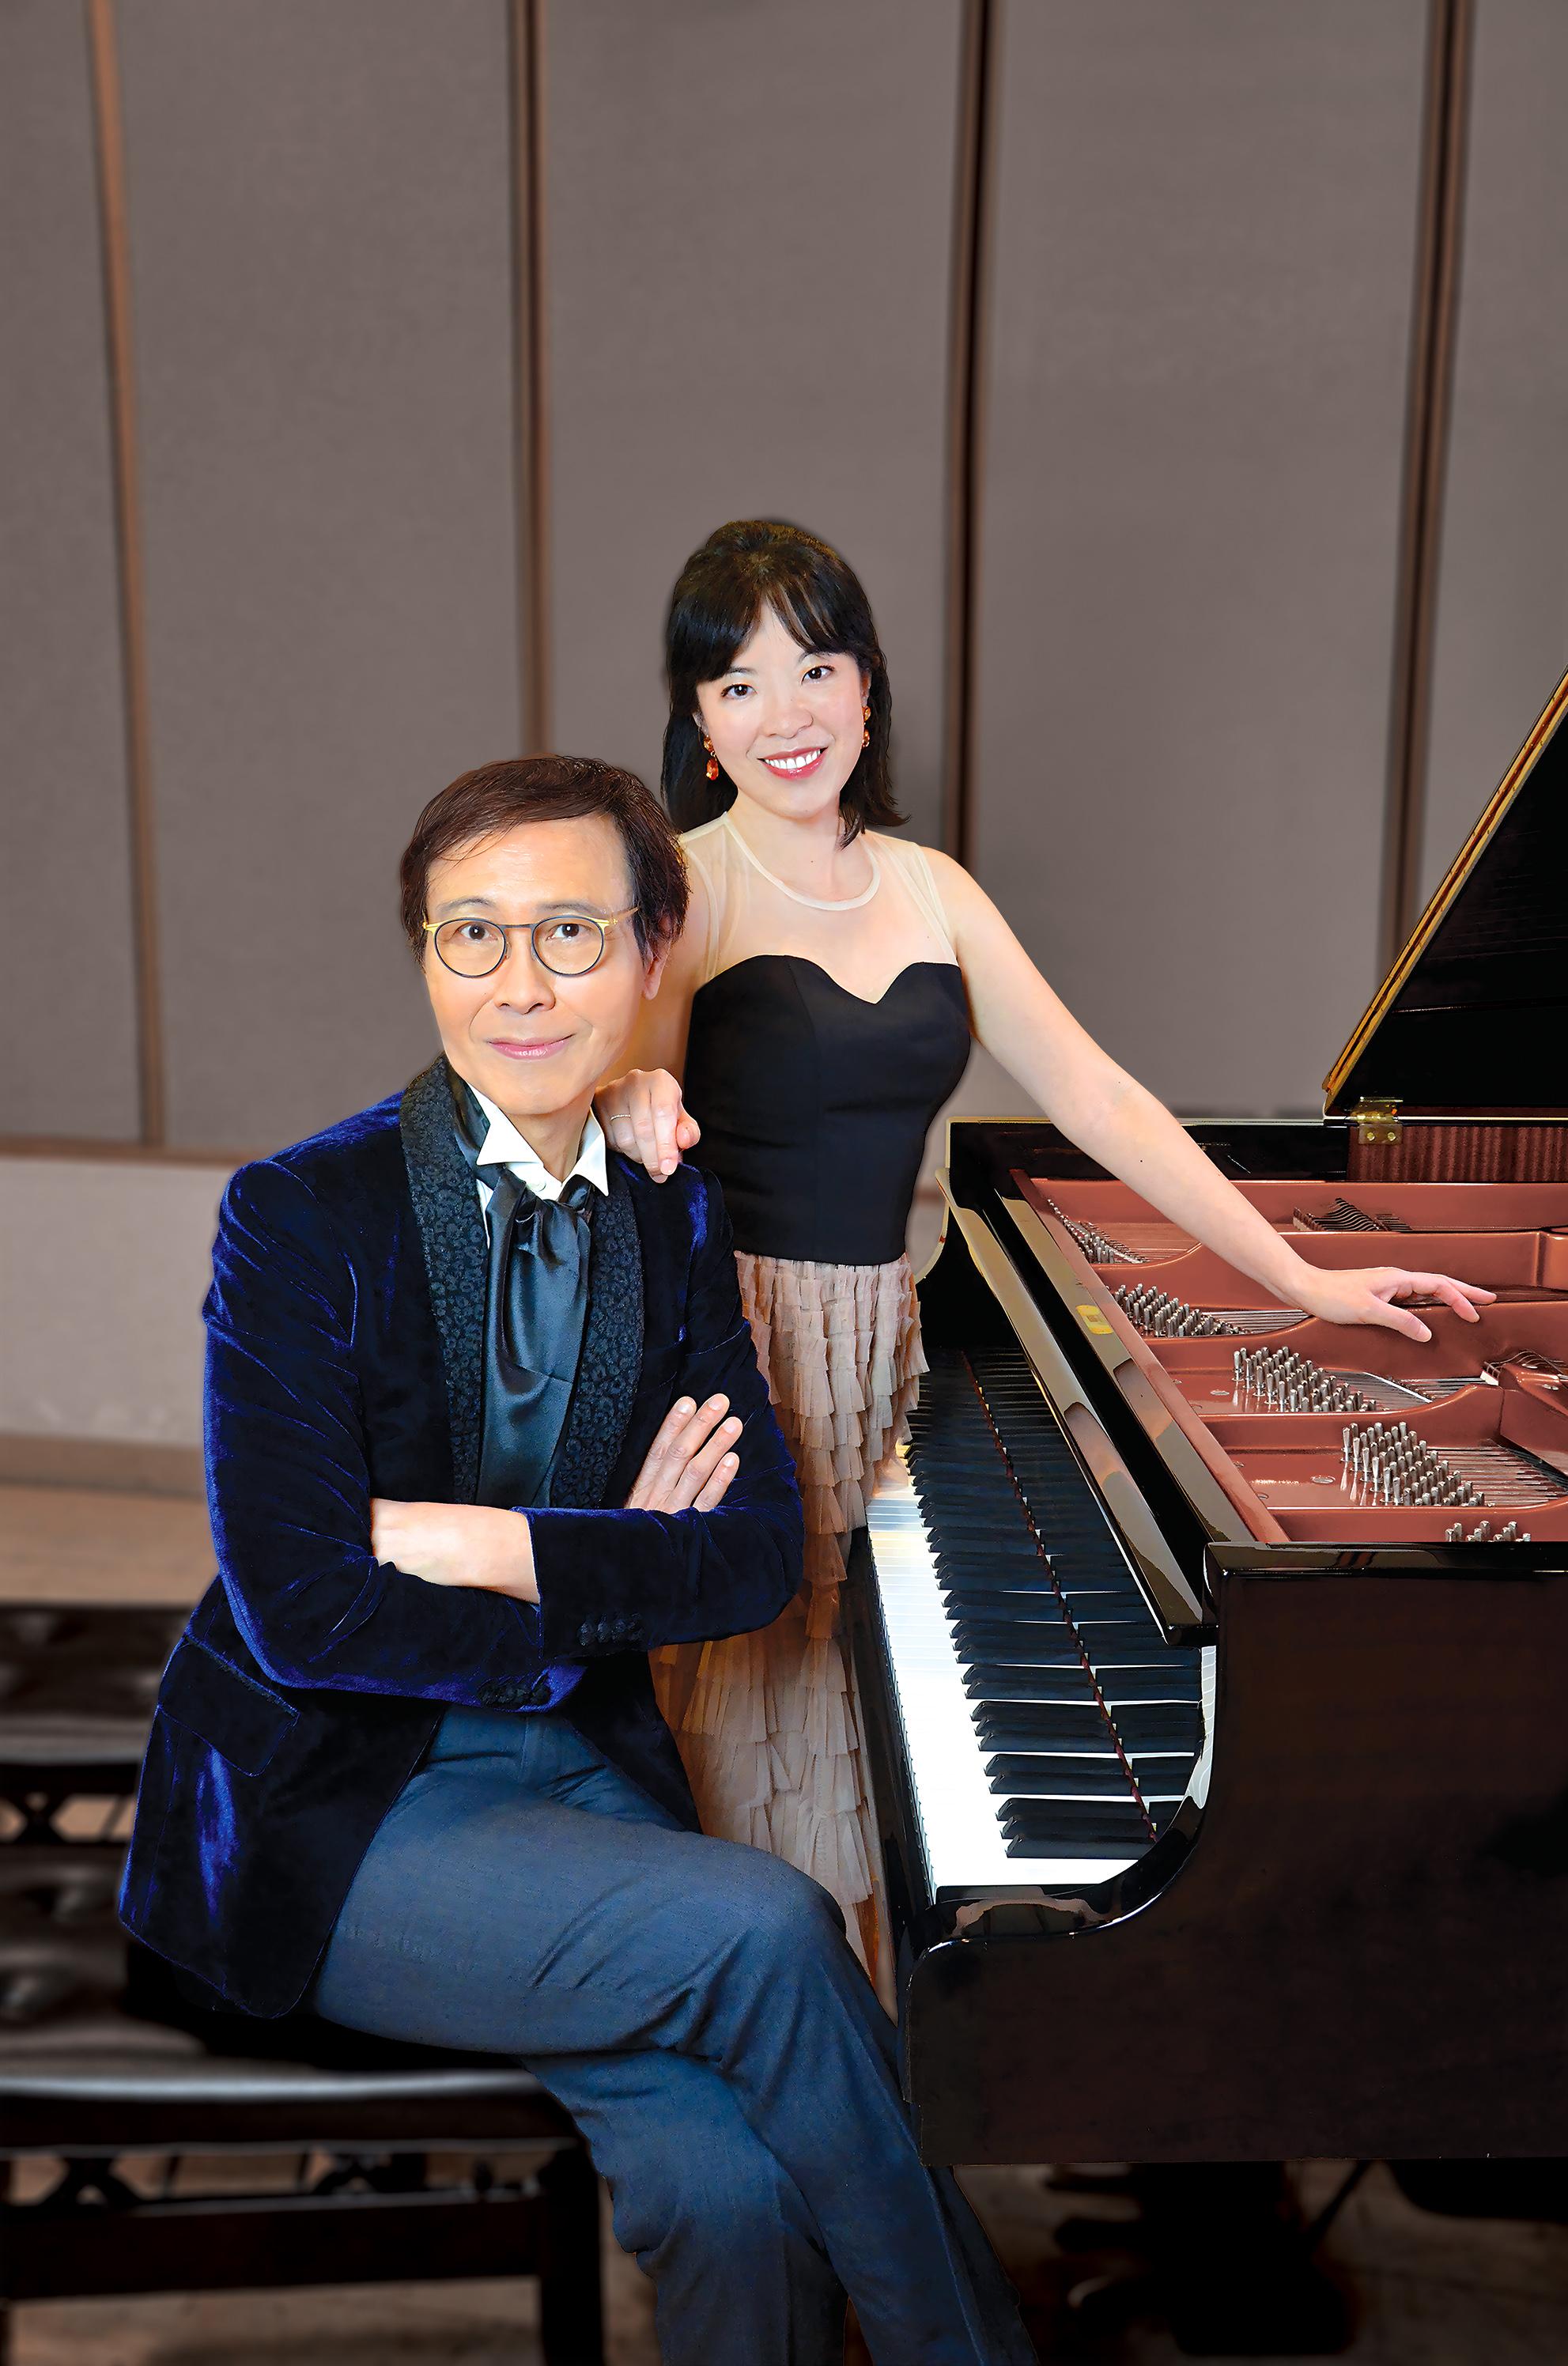 The Leisure and Cultural Services Department will launch its new "Hong Kong Artists" Series from May to November. Photo shows pianist Stephen Wong (left) and Amy Sze (right).